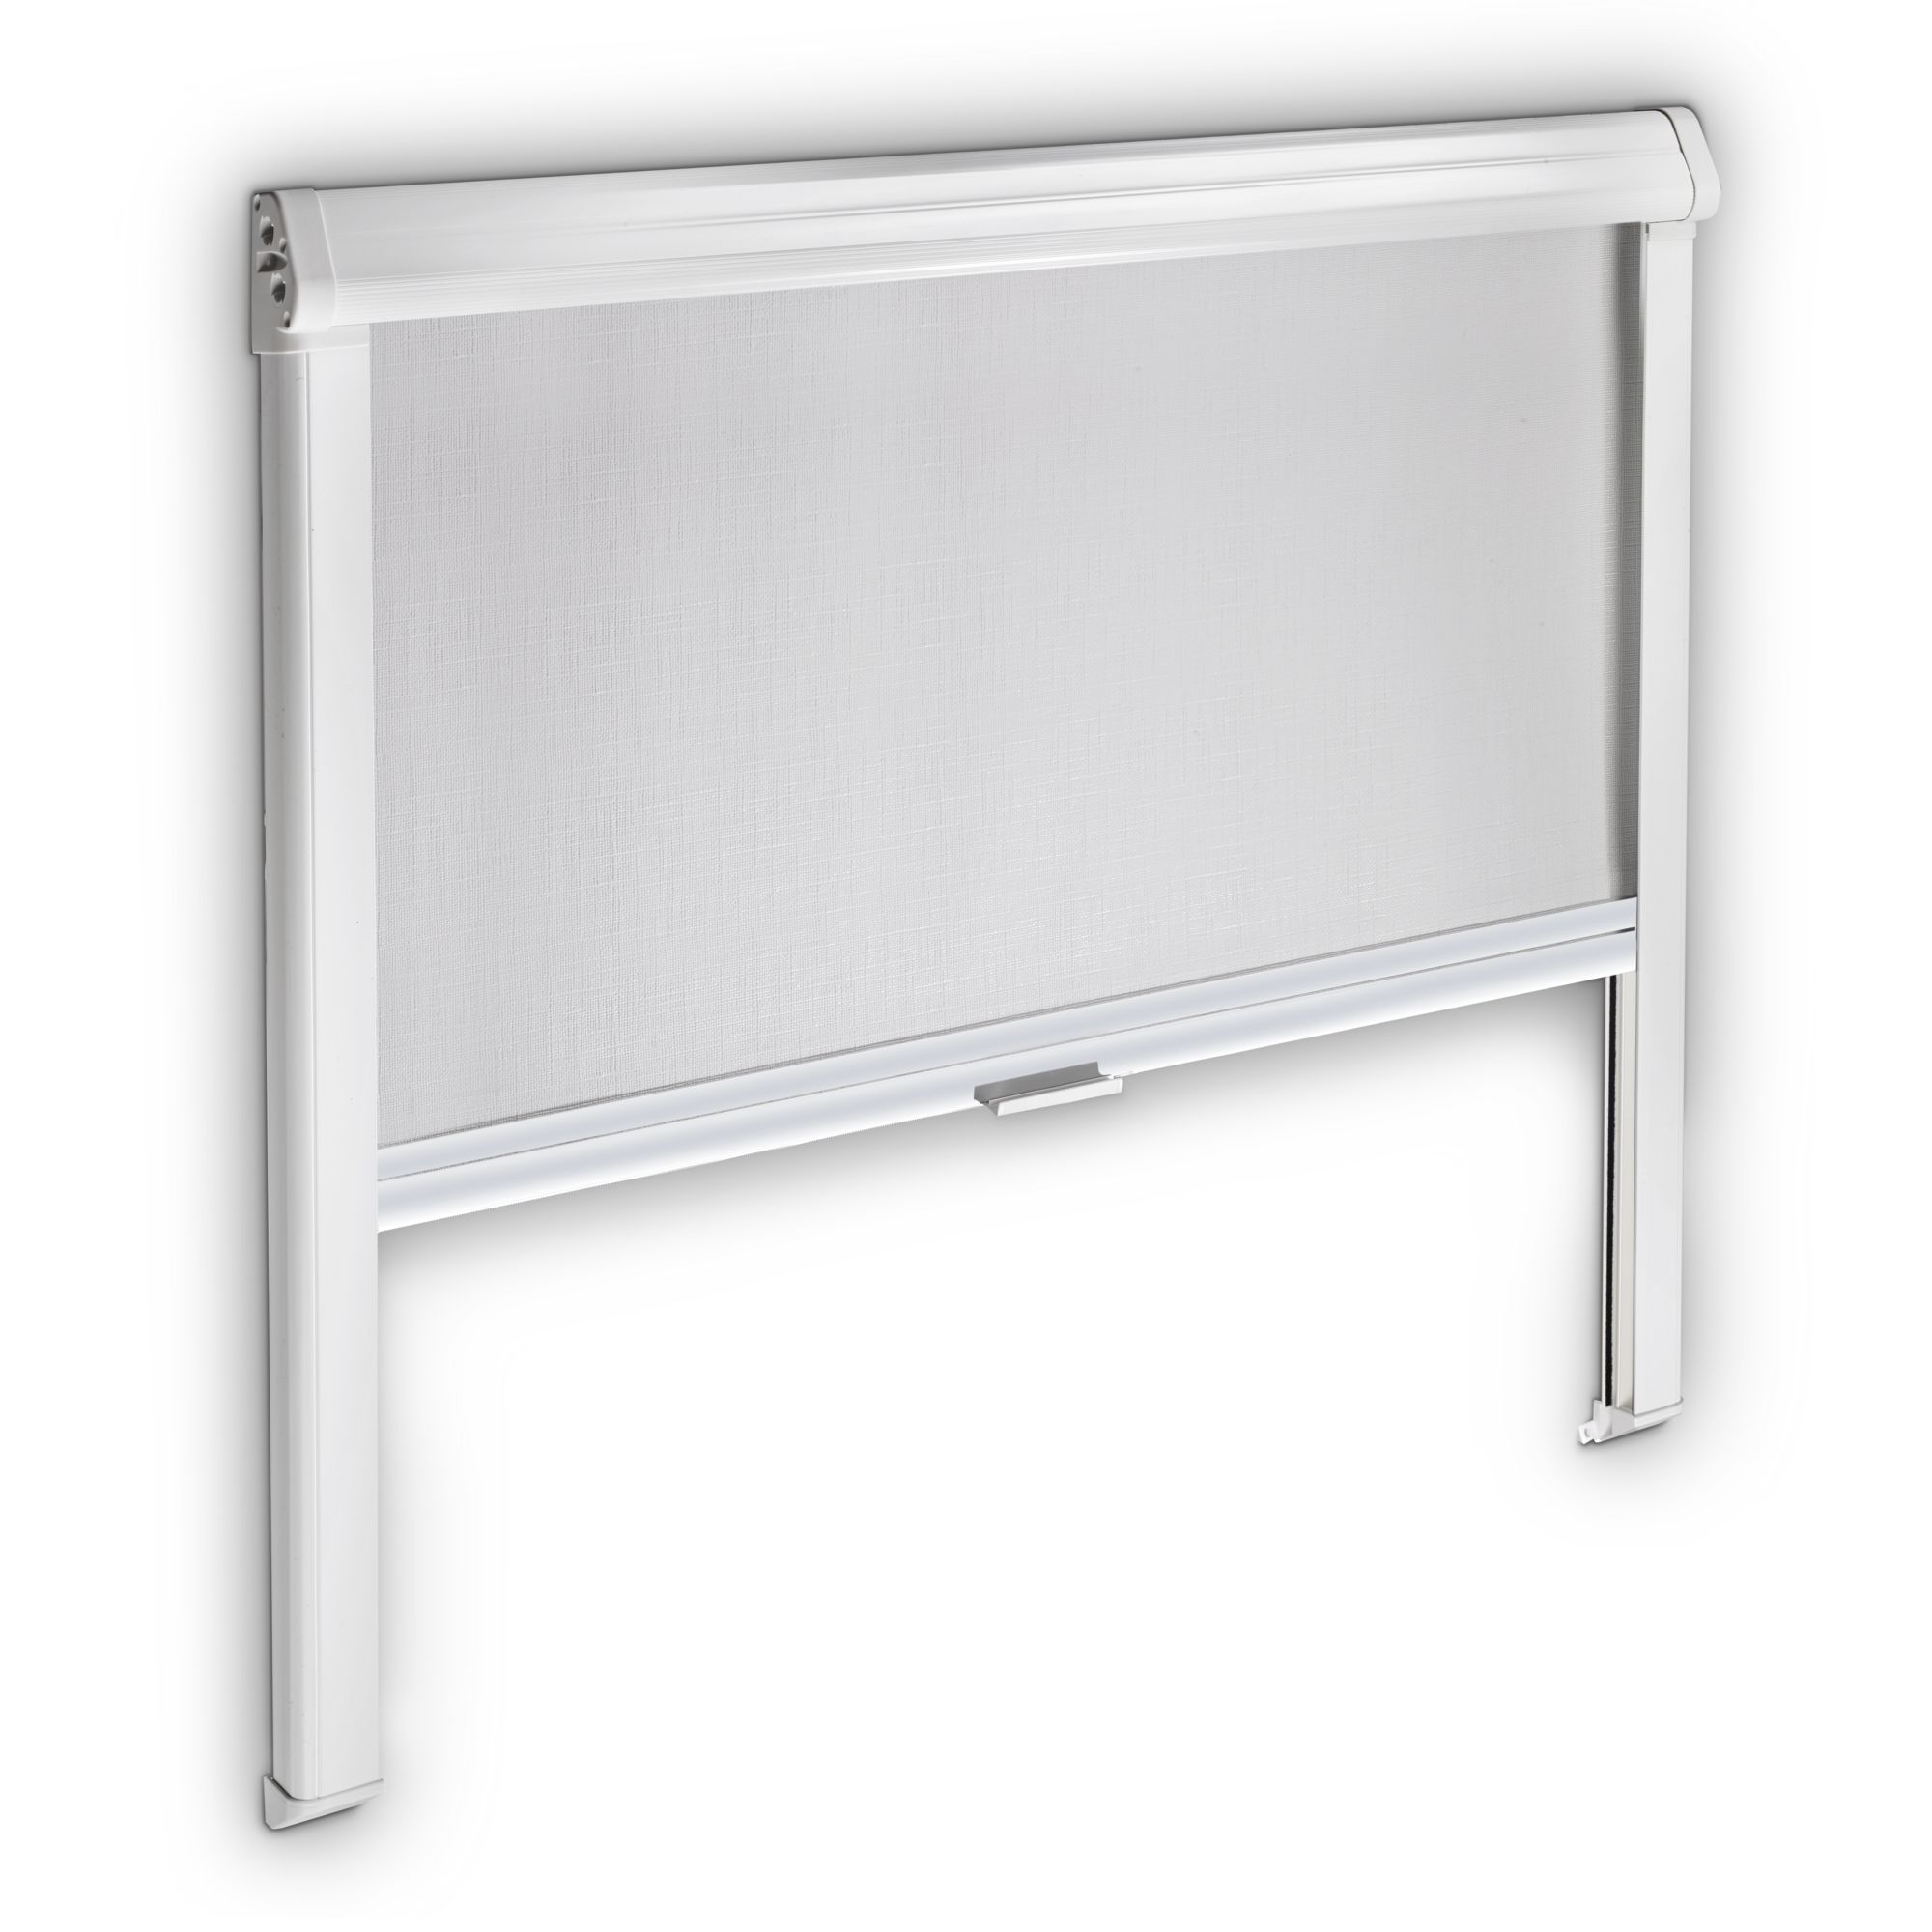 Dometic Black-Out Roller Blind 3000, 1560 x 810 mm, grey-white